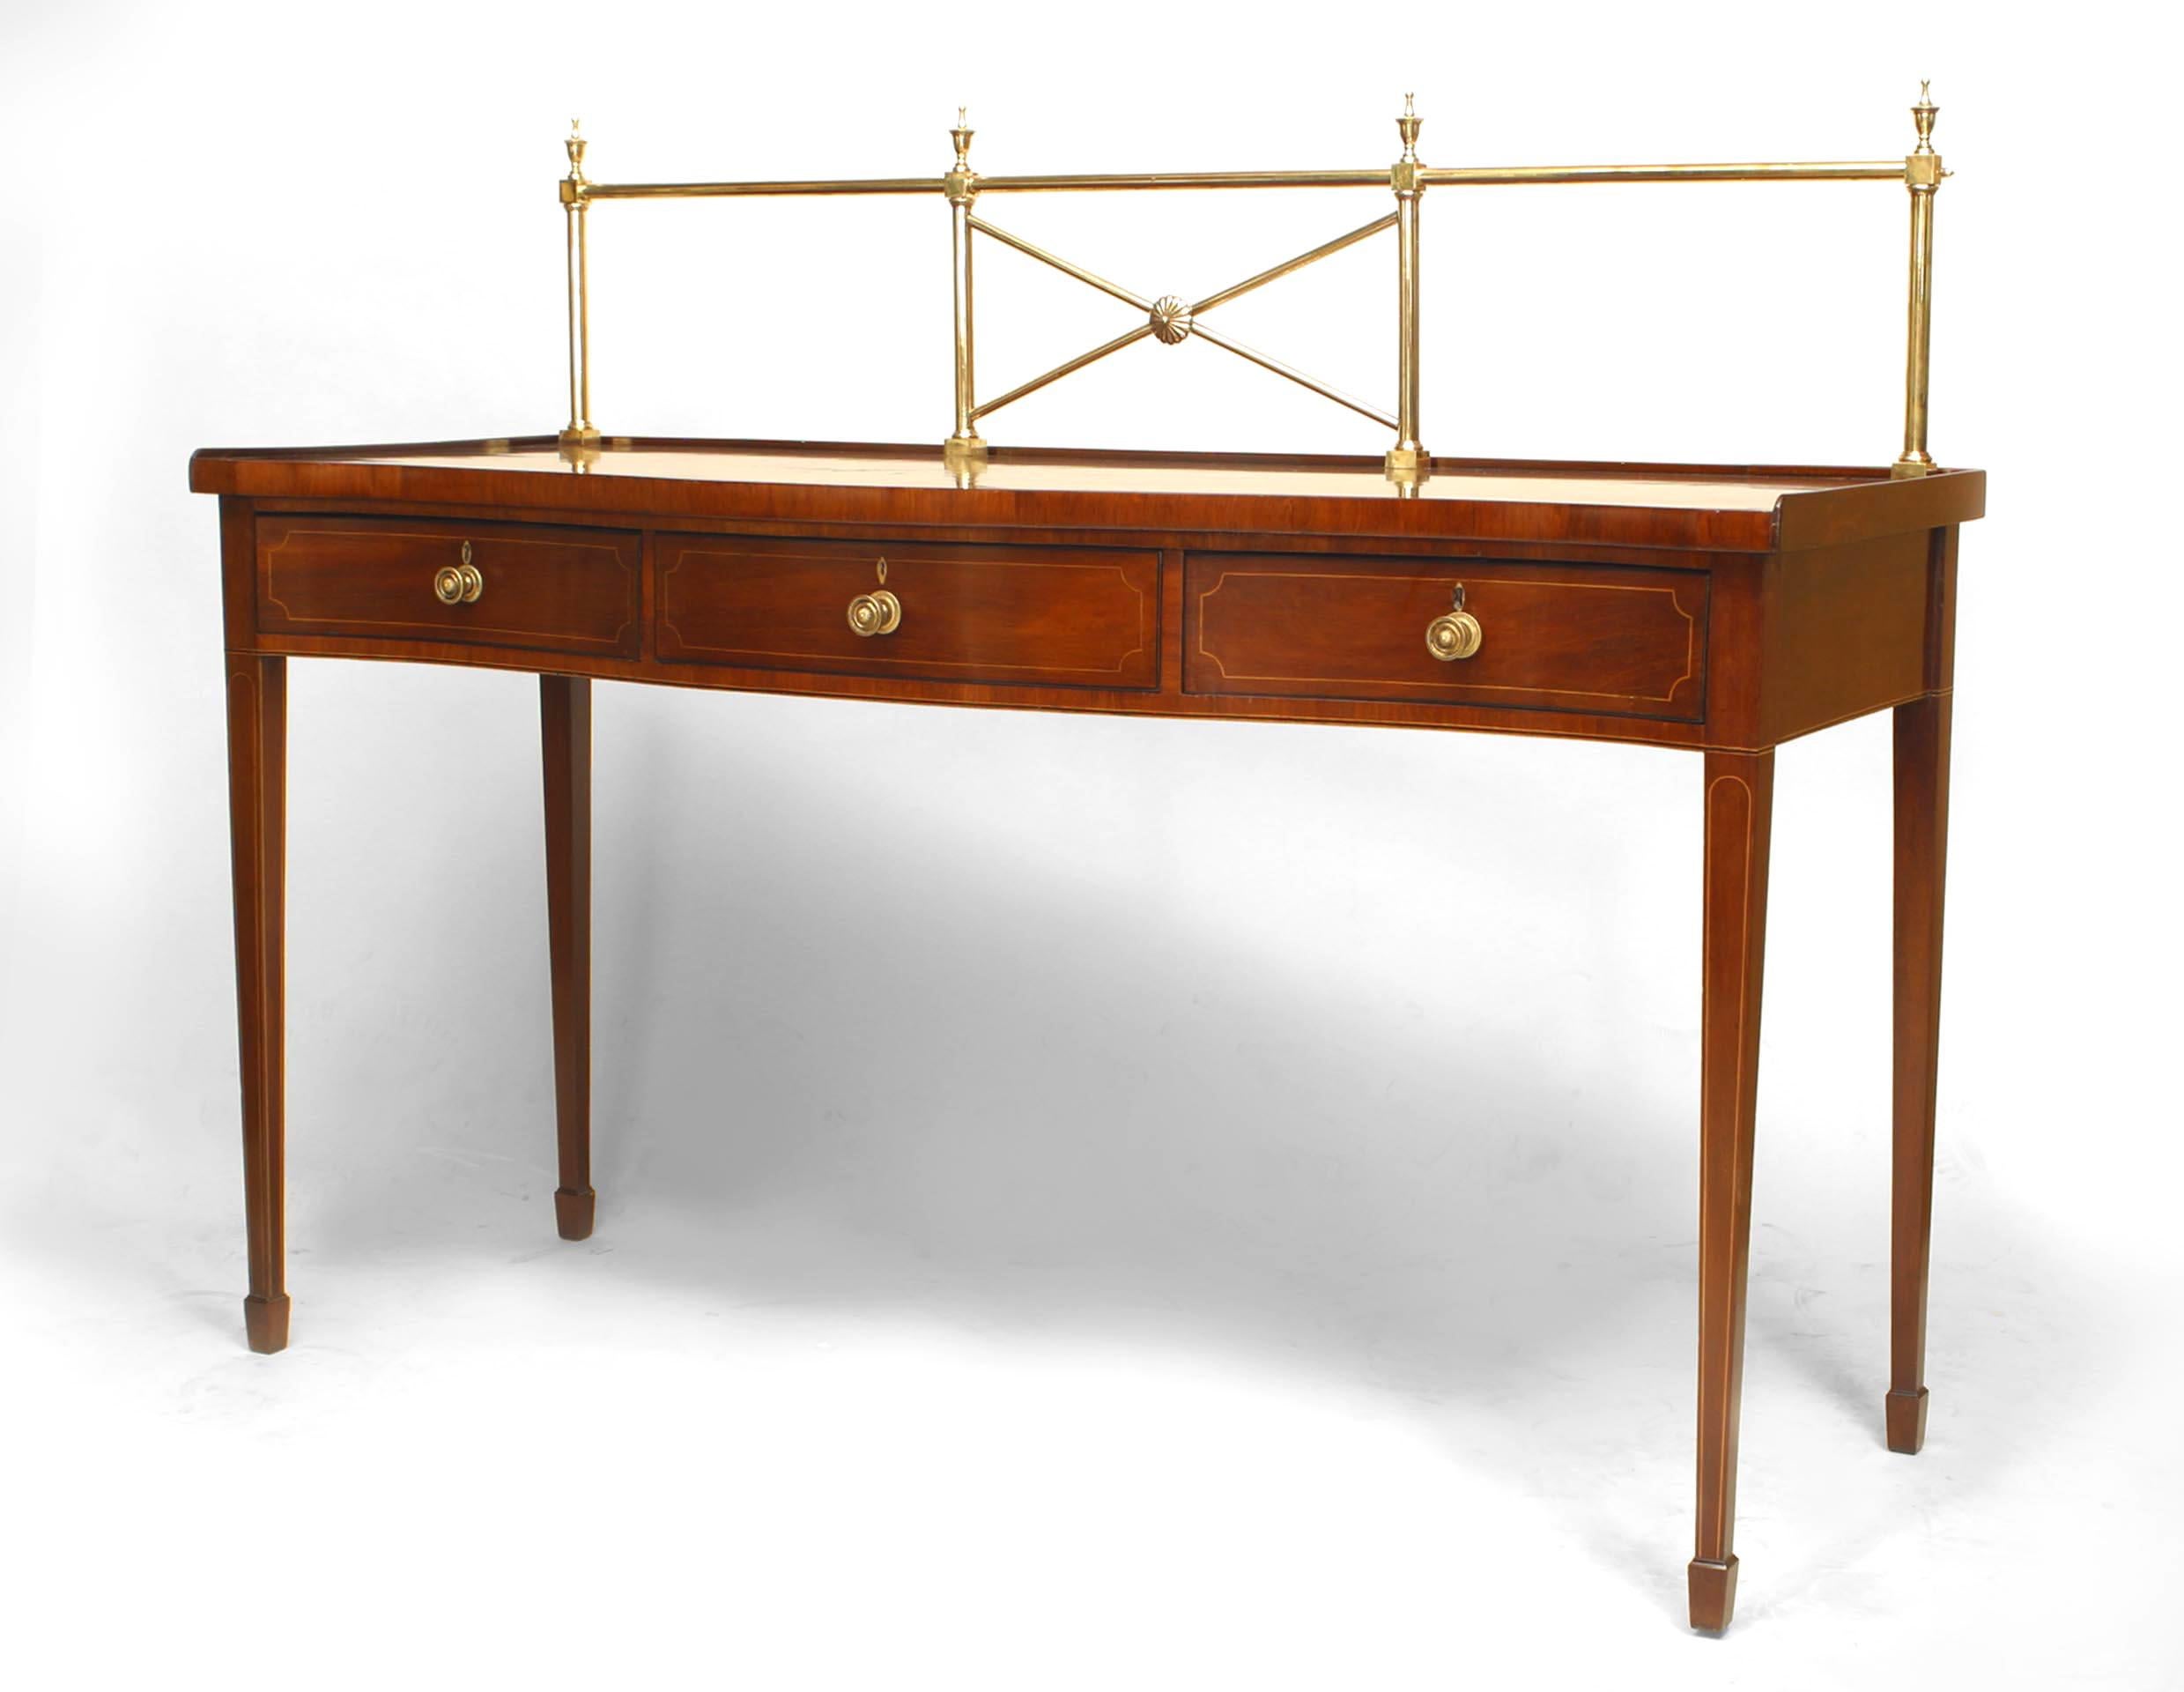 English Georgian mahogany console serving table with bow-Front Design and brass backrail gallery with satinwood banding on legs and three drawers having round brass knobs.
 